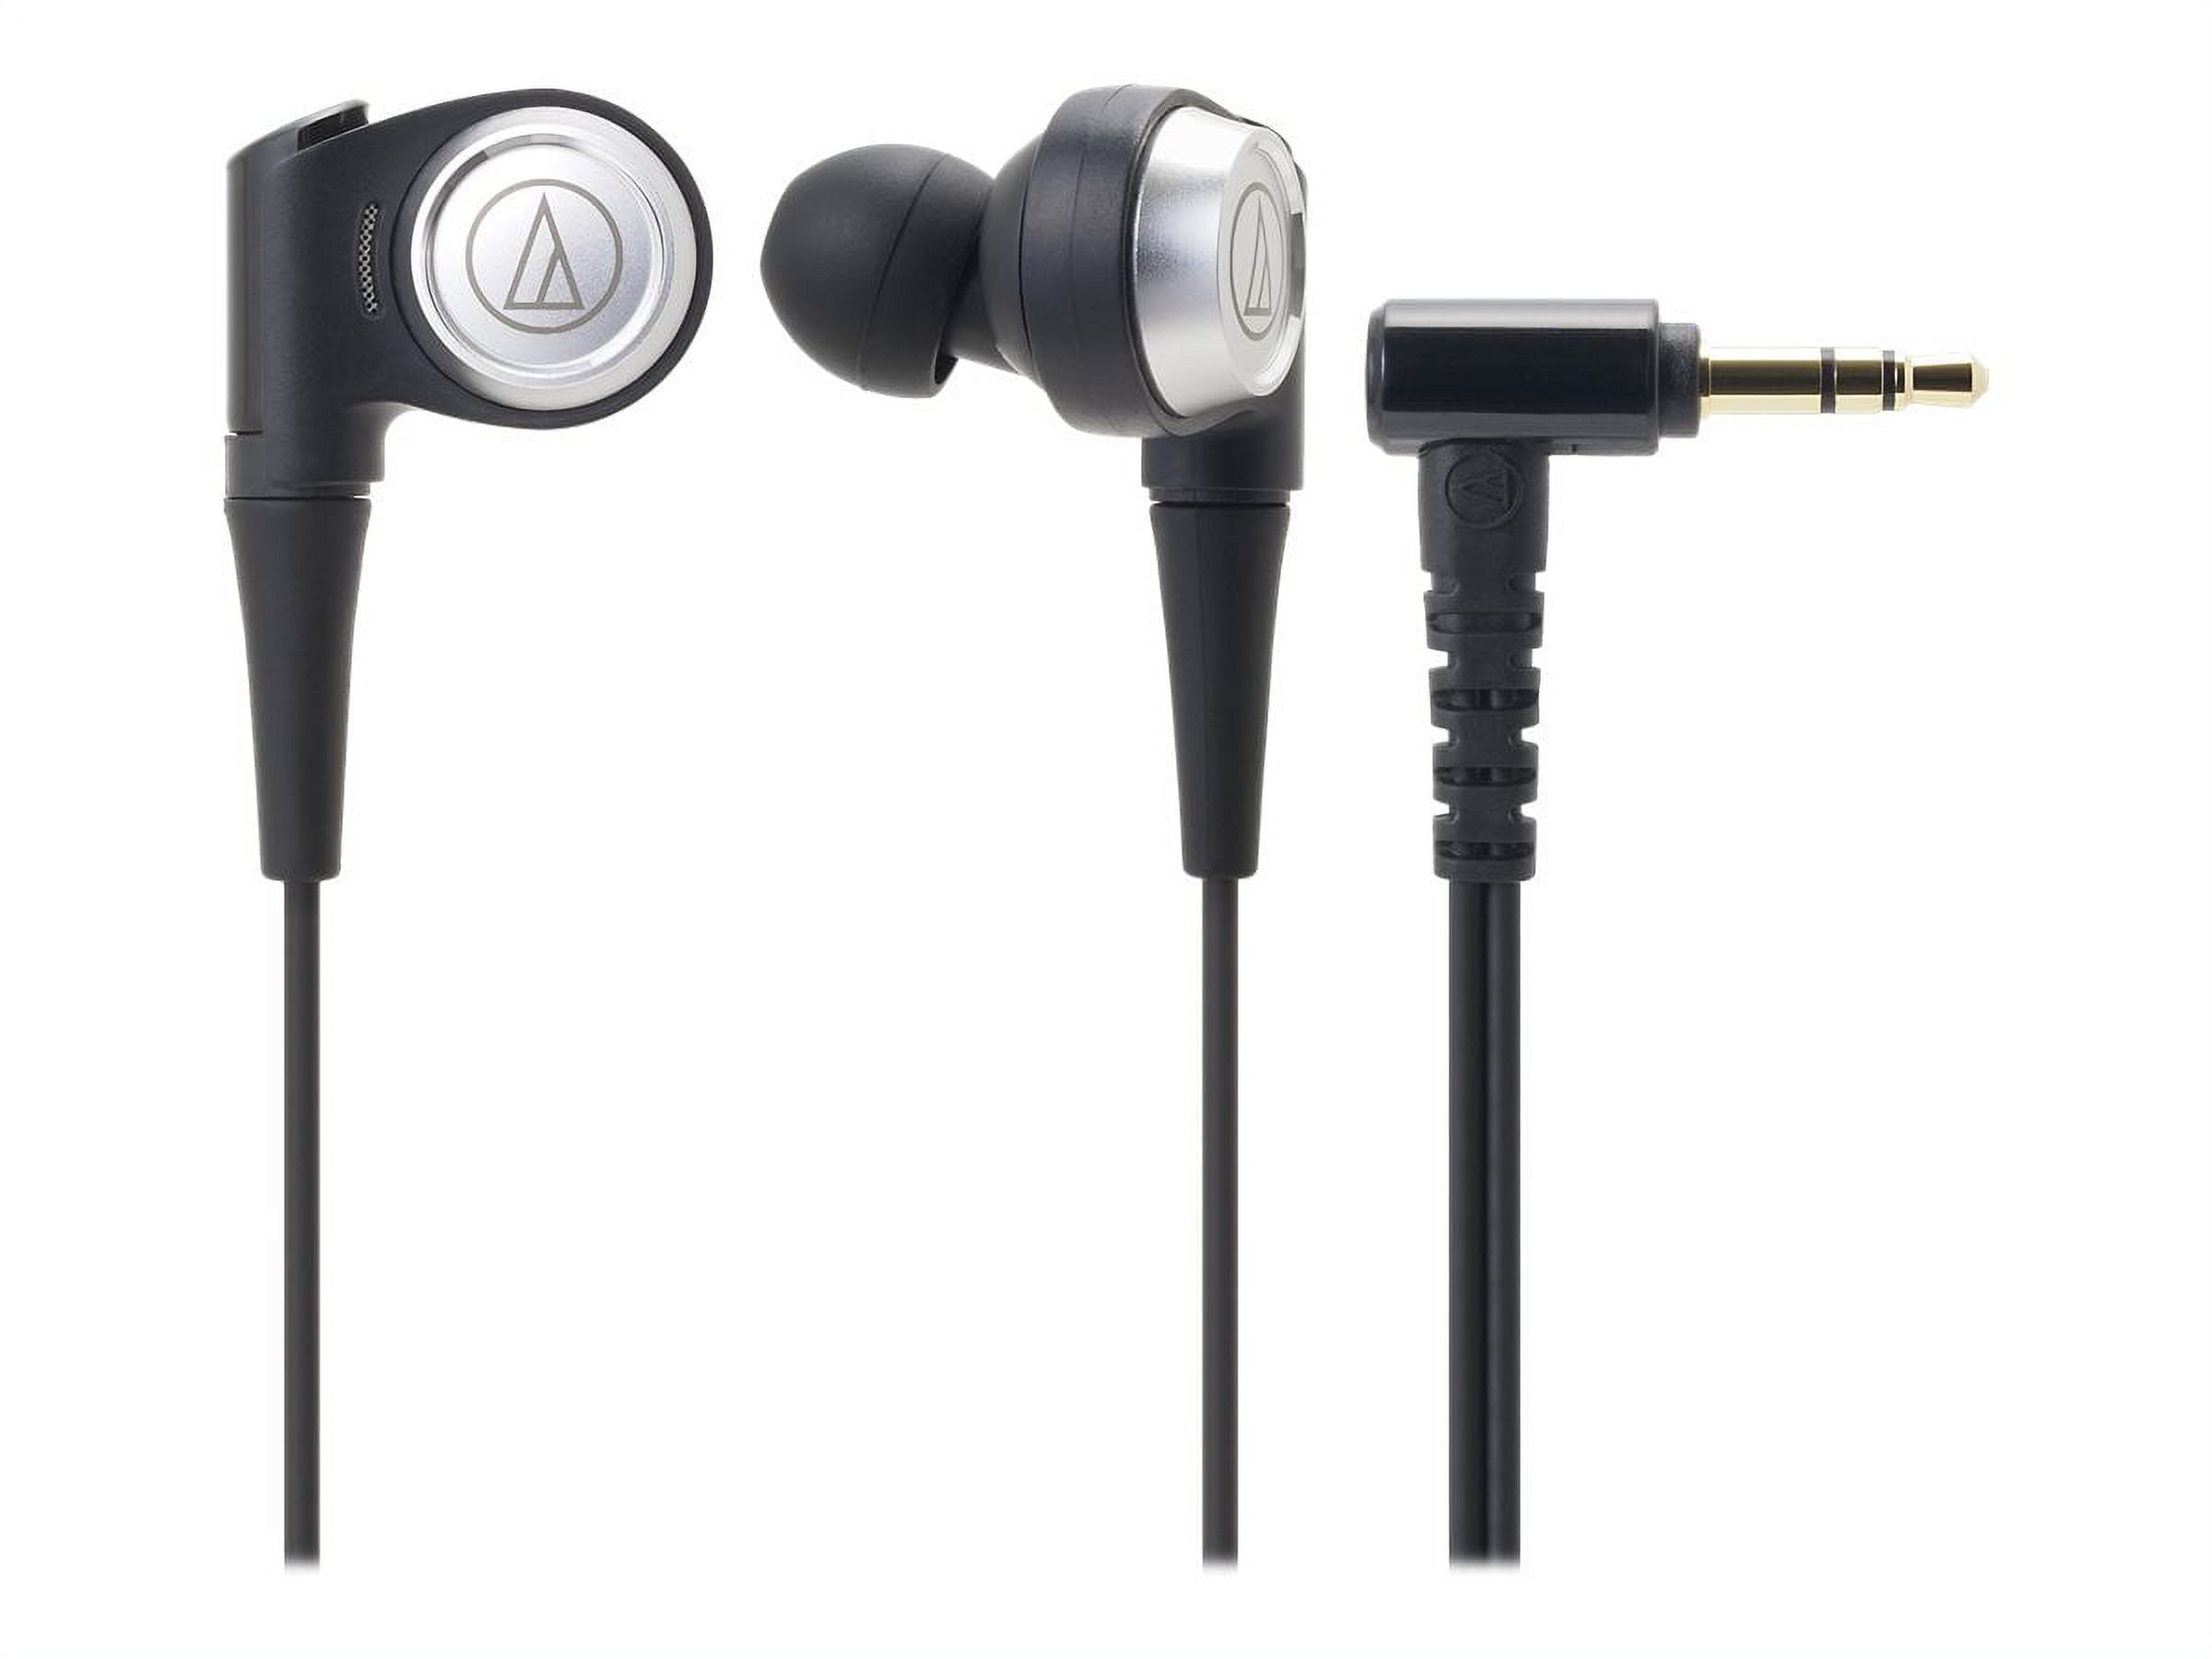 Audio-Technica ATH-CK9 SonicPro CK9 Earbuds - image 4 of 7